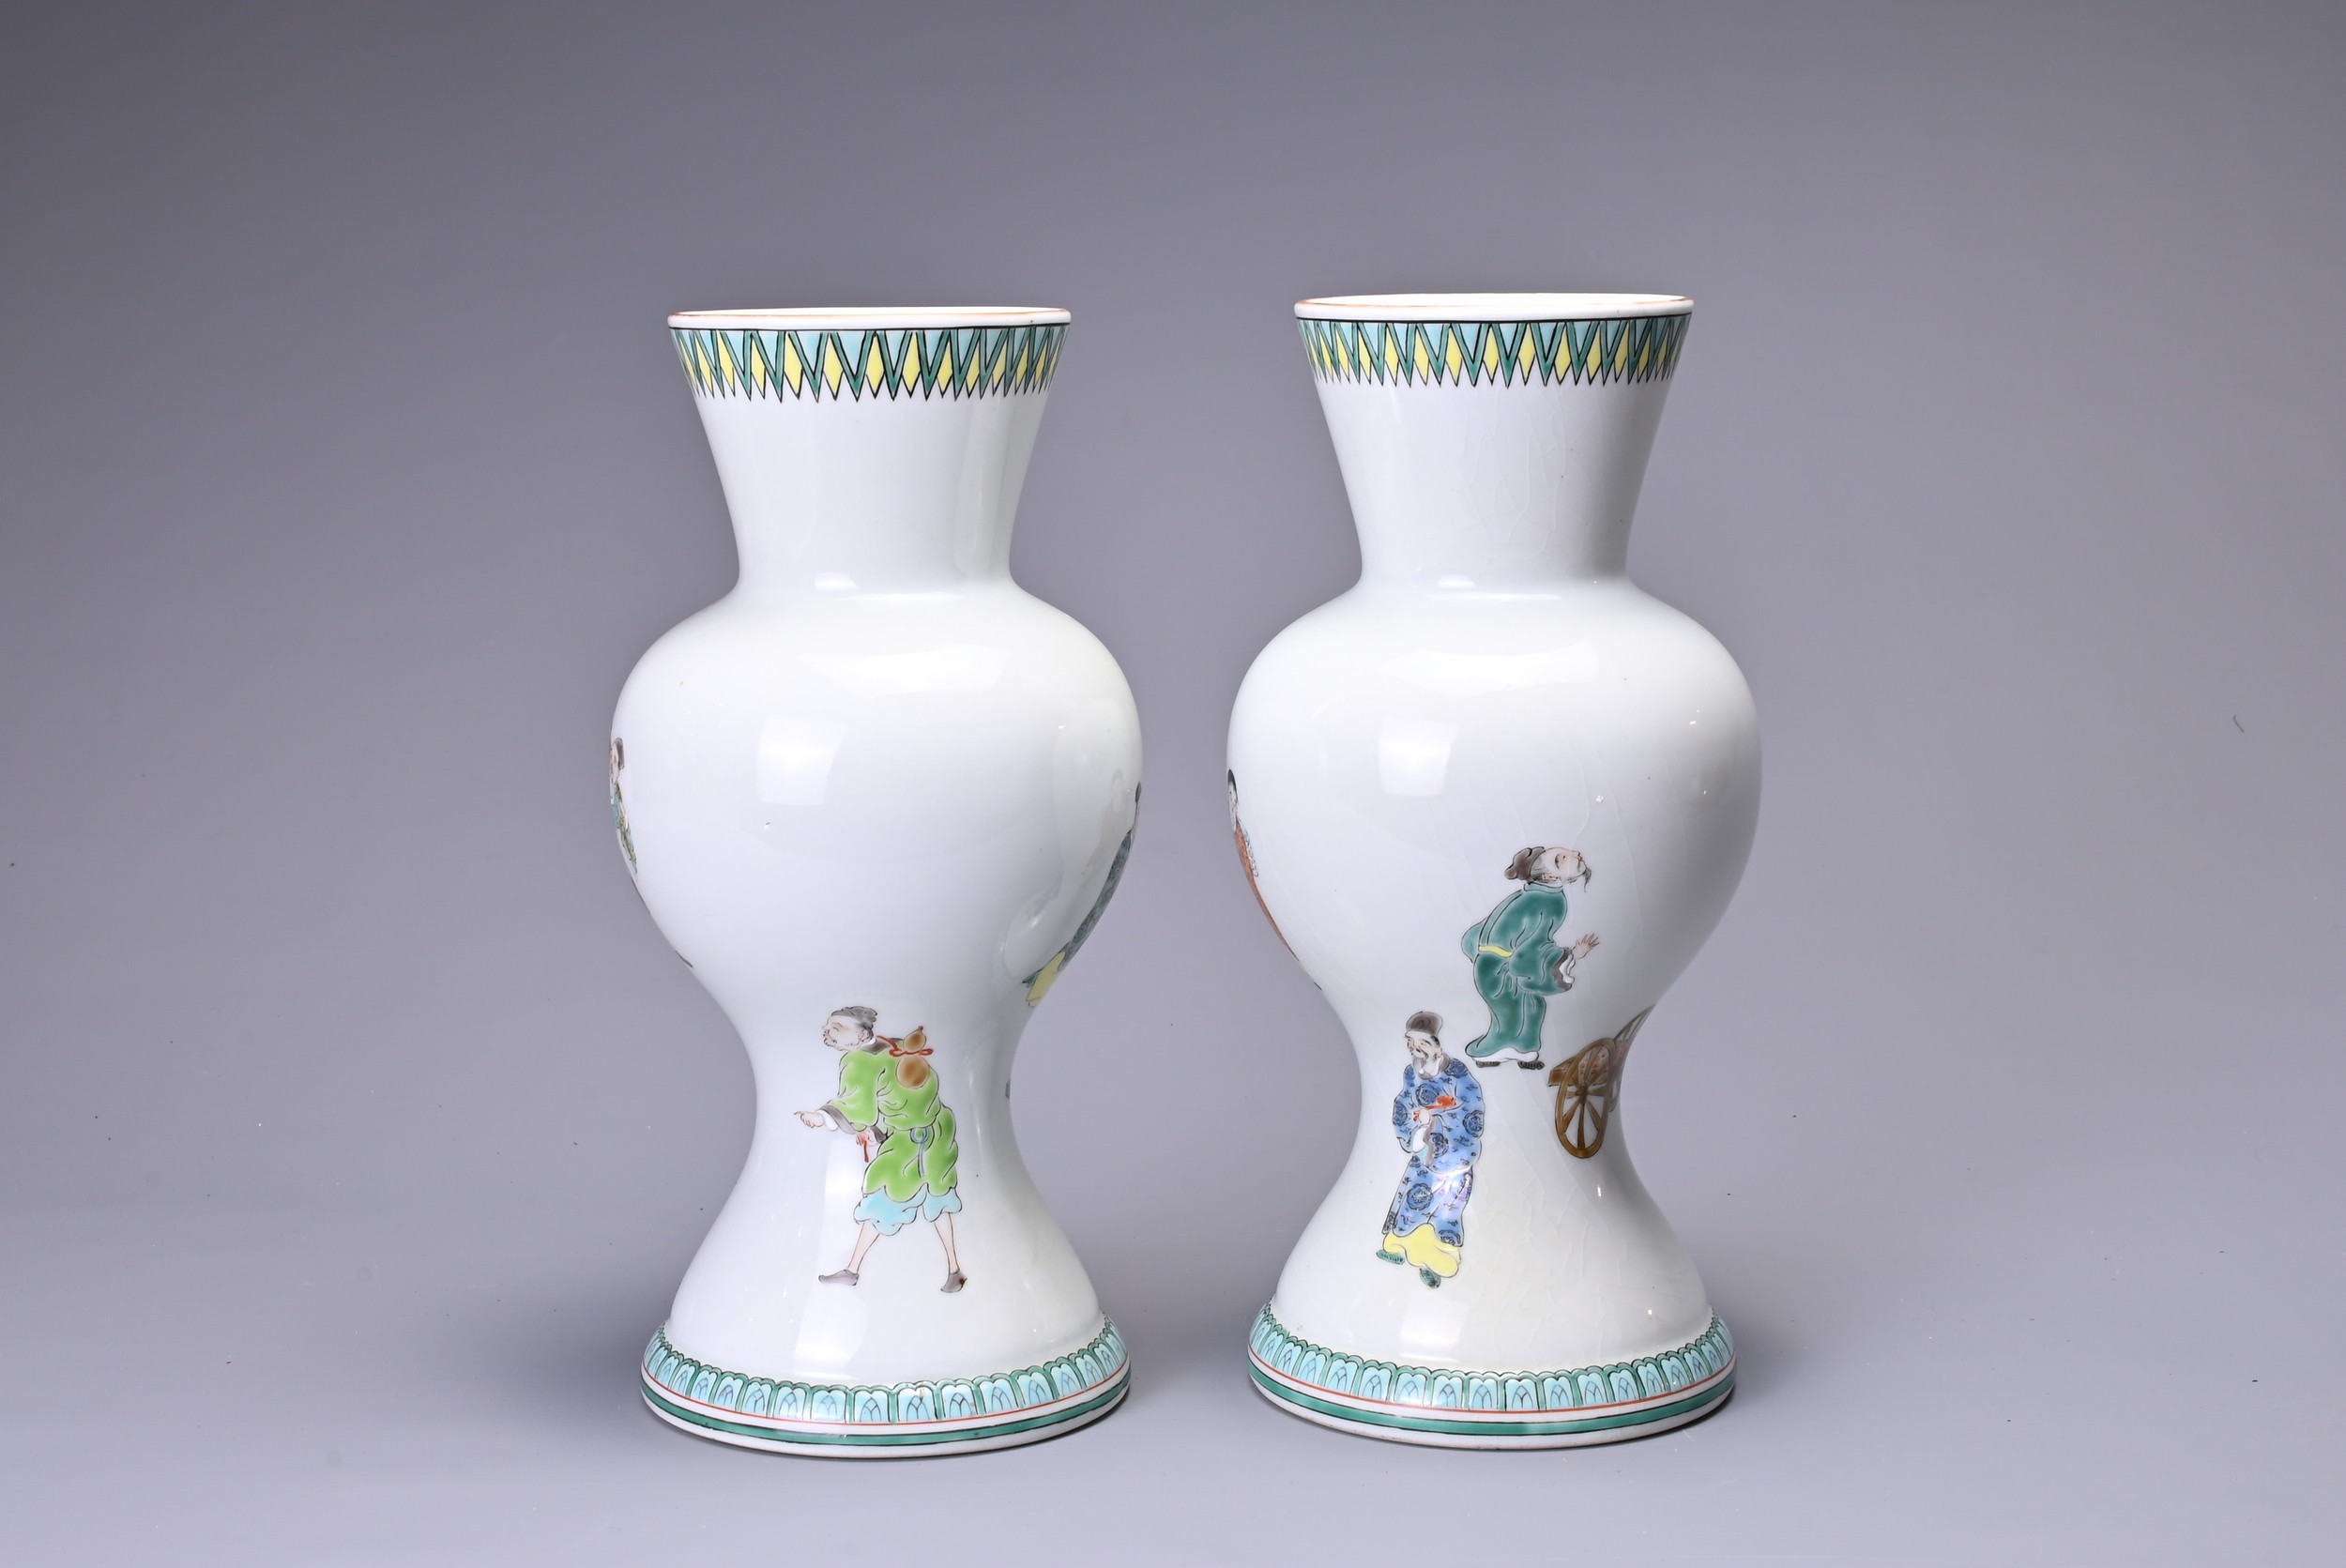 A PAIR OF 20TH CENTURY JAPANESE PORCELAIN FAMILLE VERTE-STYLE BALUSTER VASES. Each with green and - Image 3 of 7